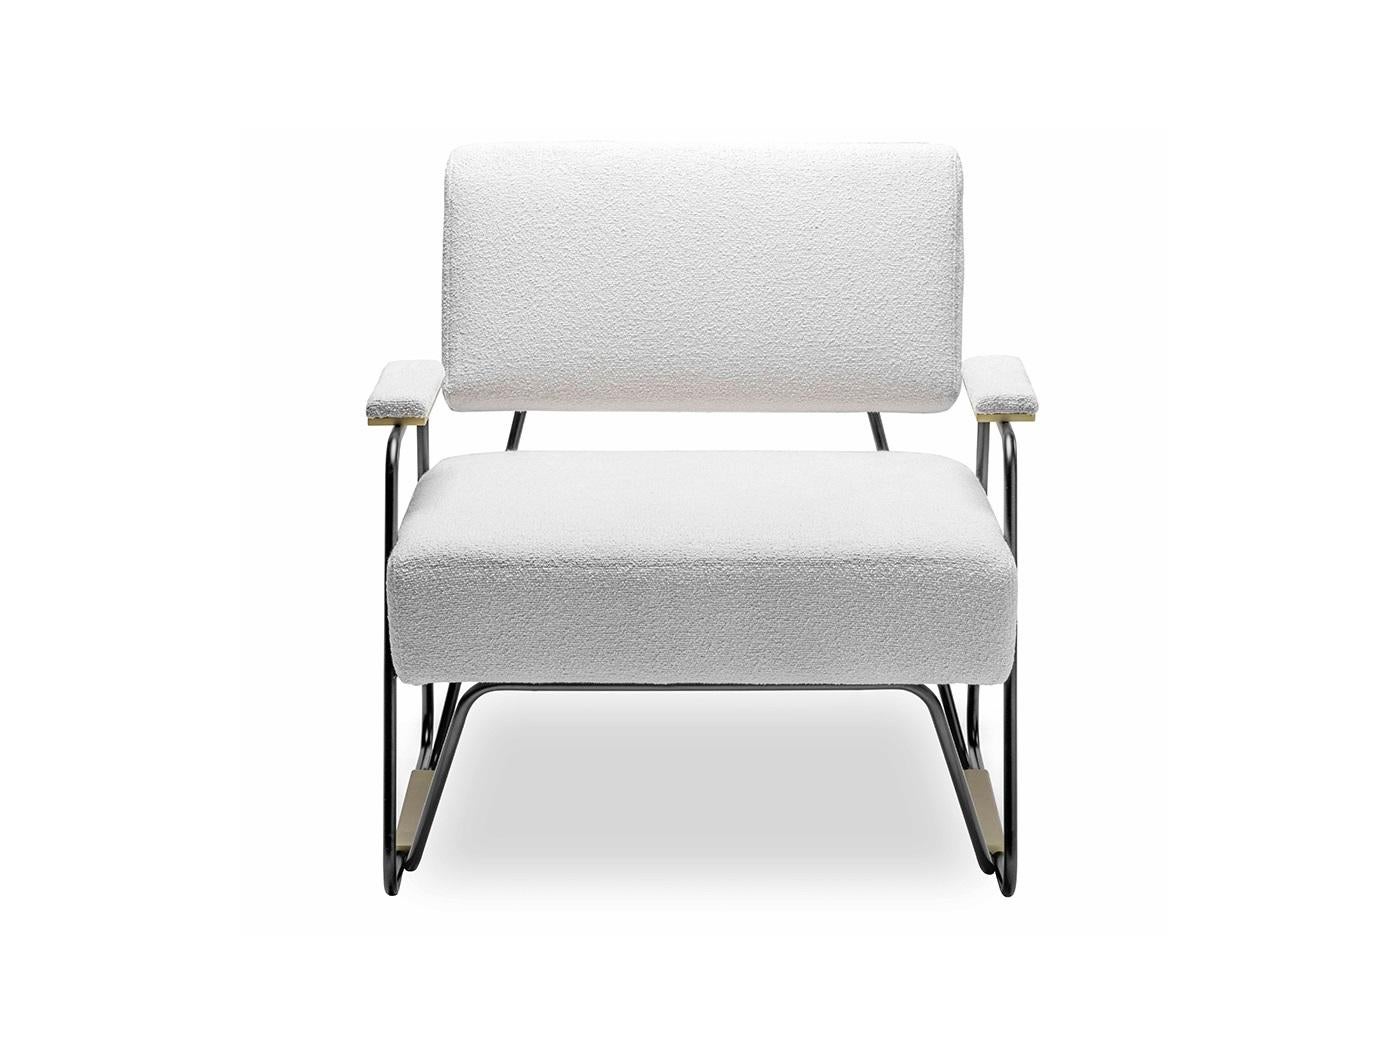 Contemporary sled base armchair shown in black iron frame with brushed brass details and white bouclé fabric.
Multiple layers of foam with various densities provide high level of comfort.
Custom sizes and materials available.
100% European